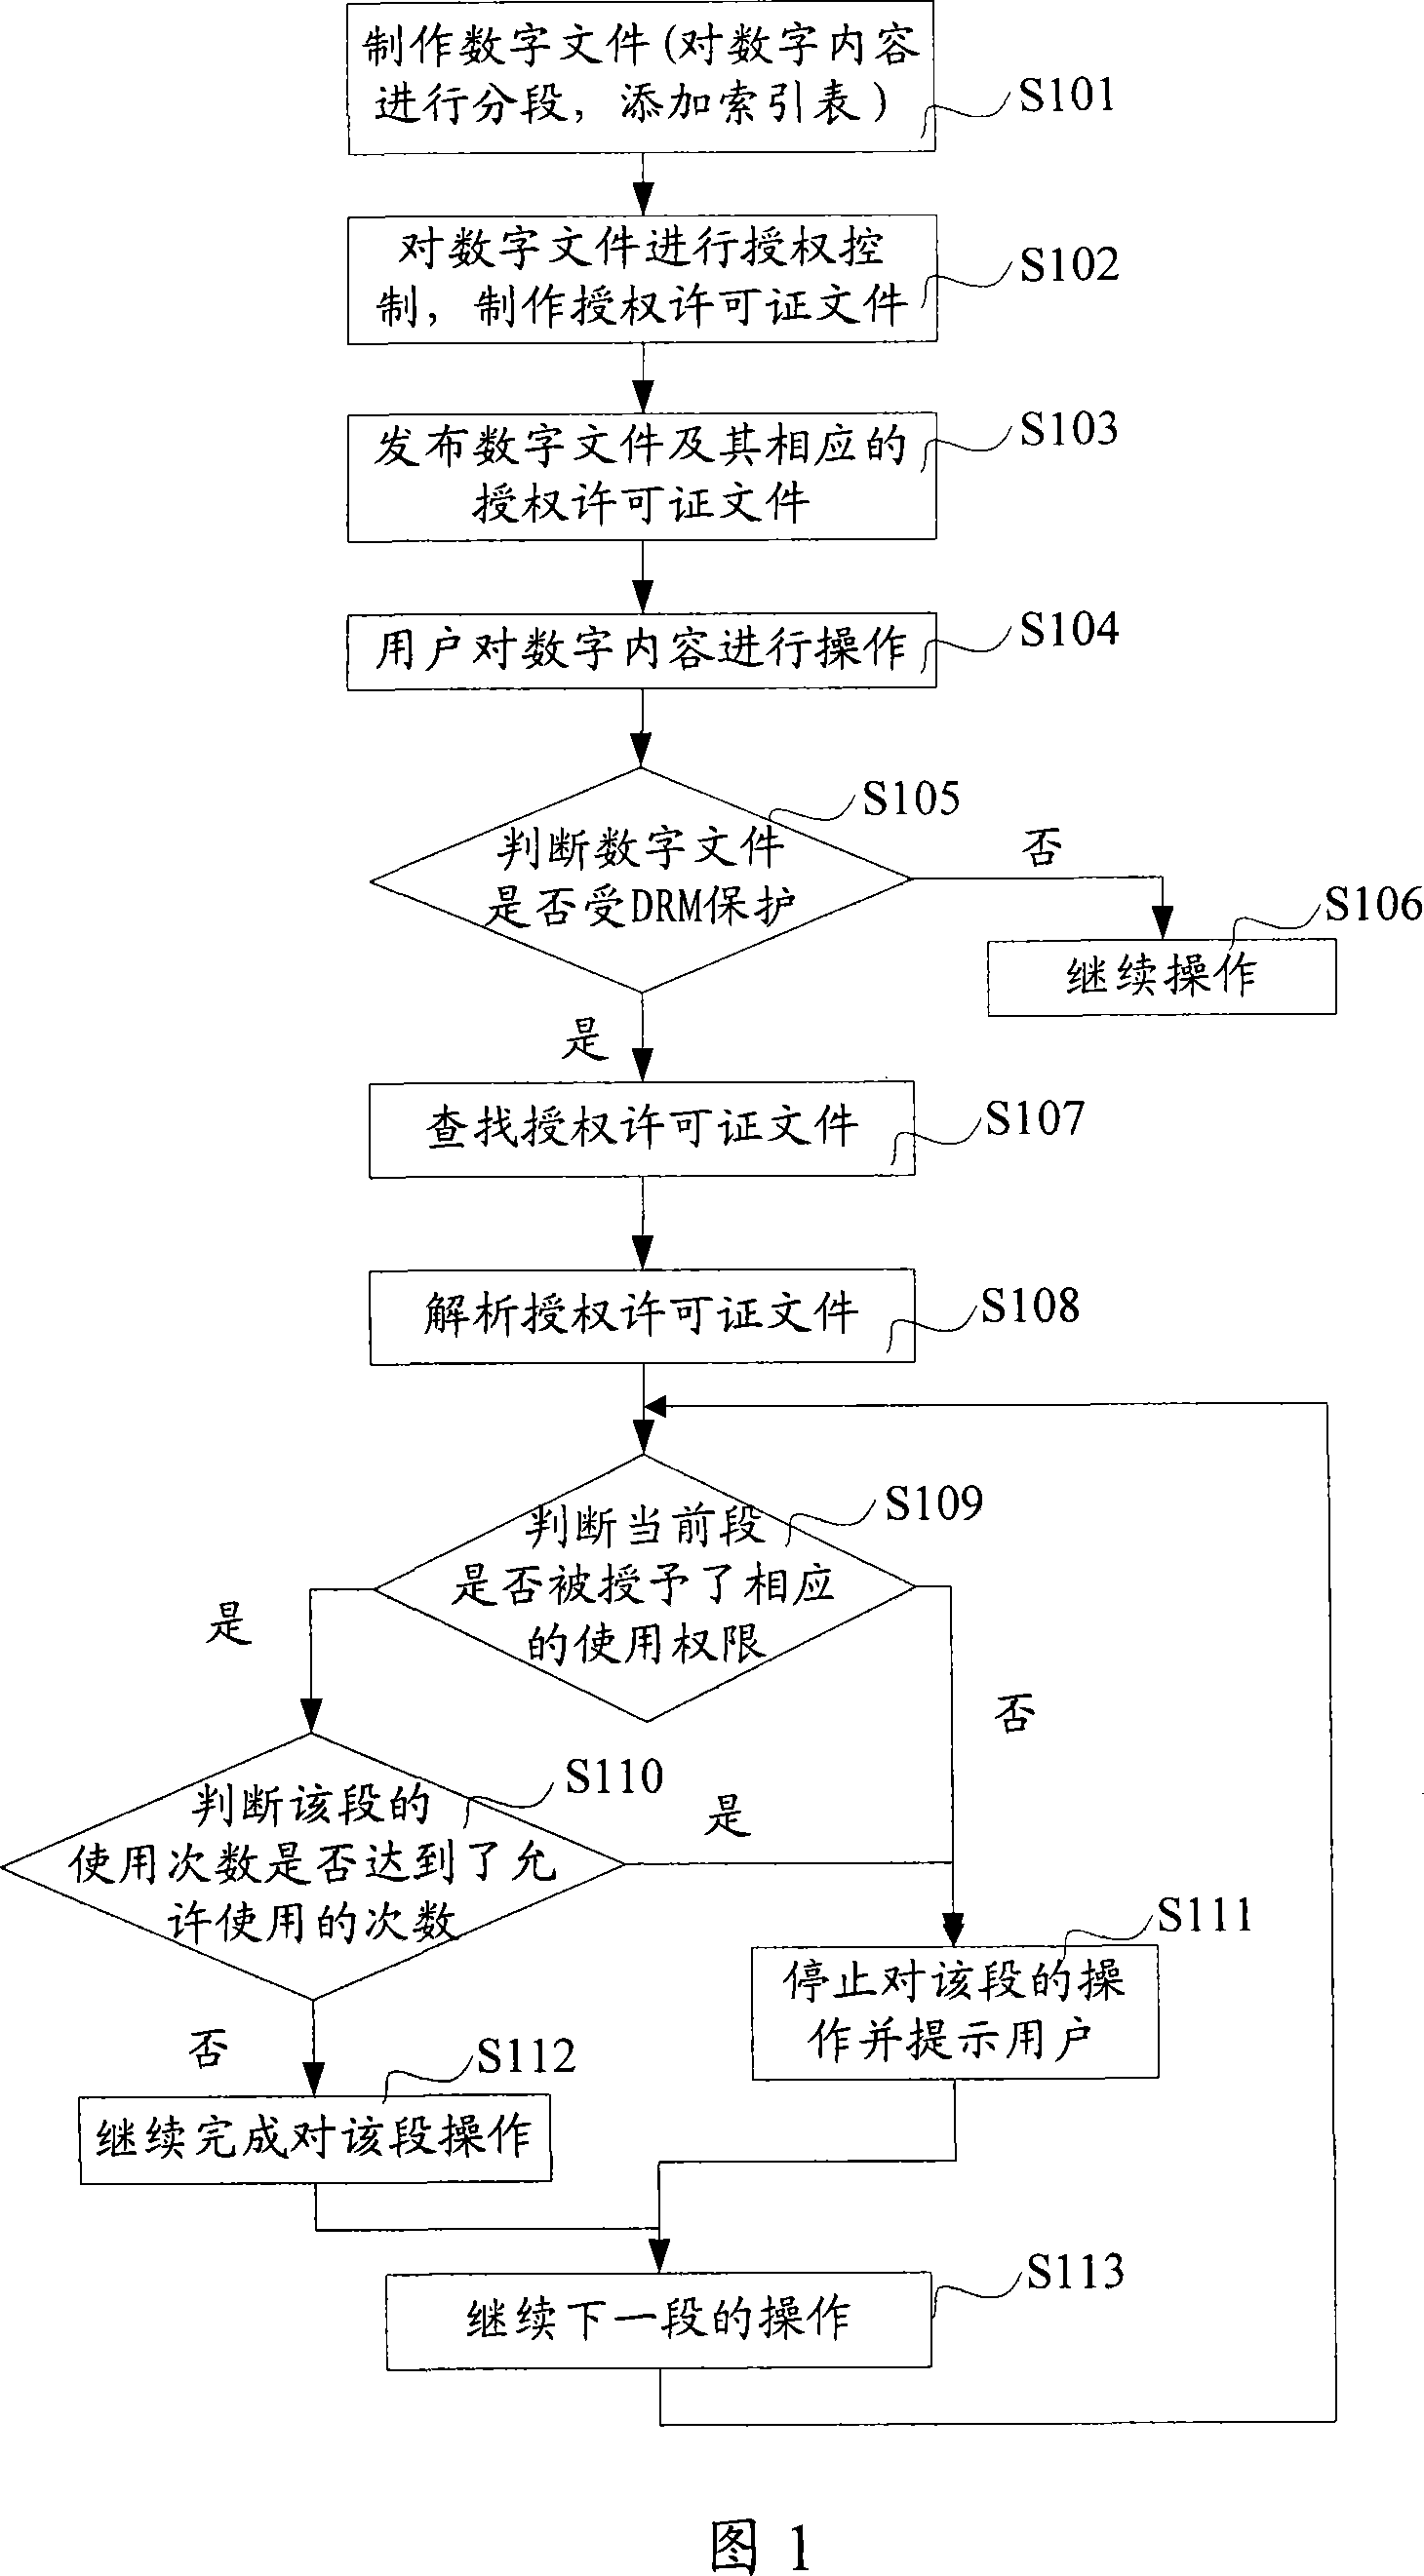 Method and system for implementing authorization management of digital contents